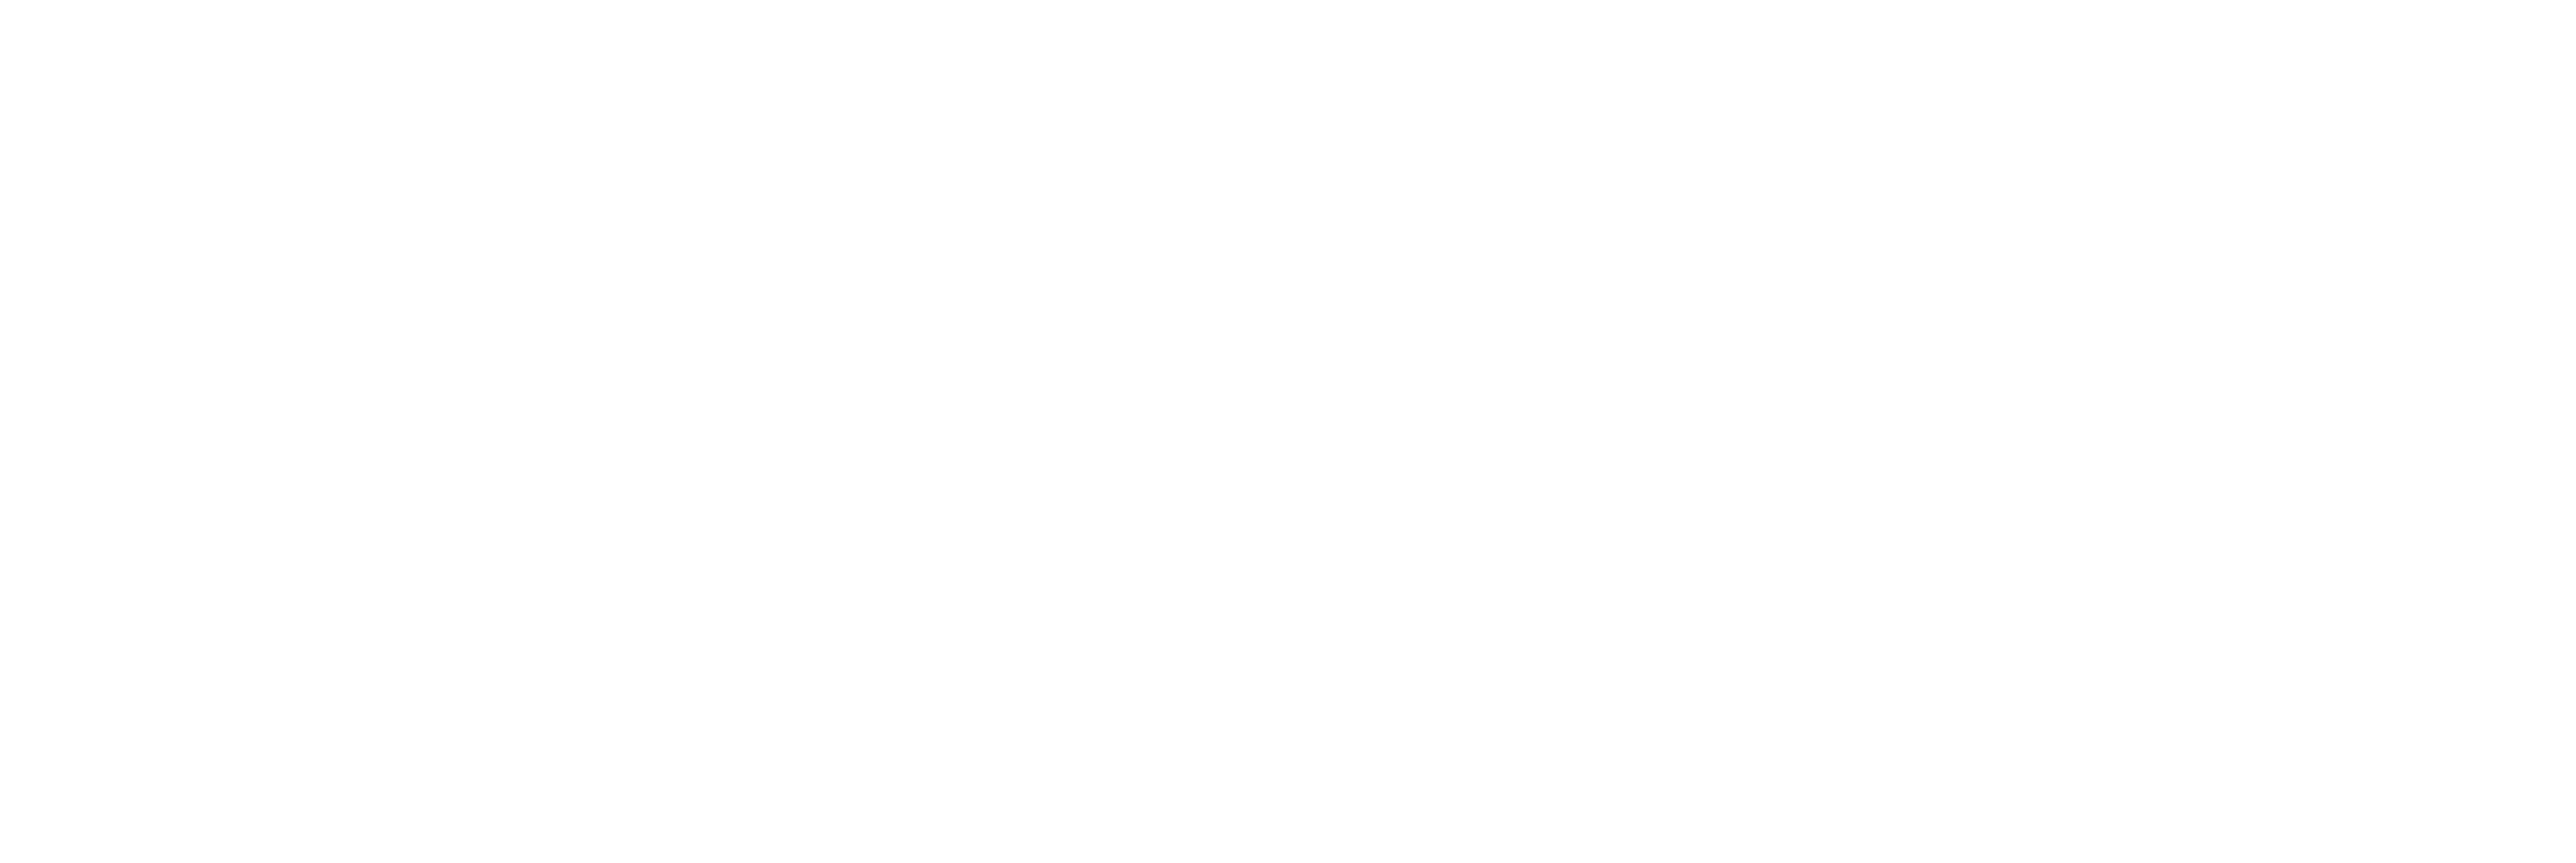 Gusbourne_Solid_White.png